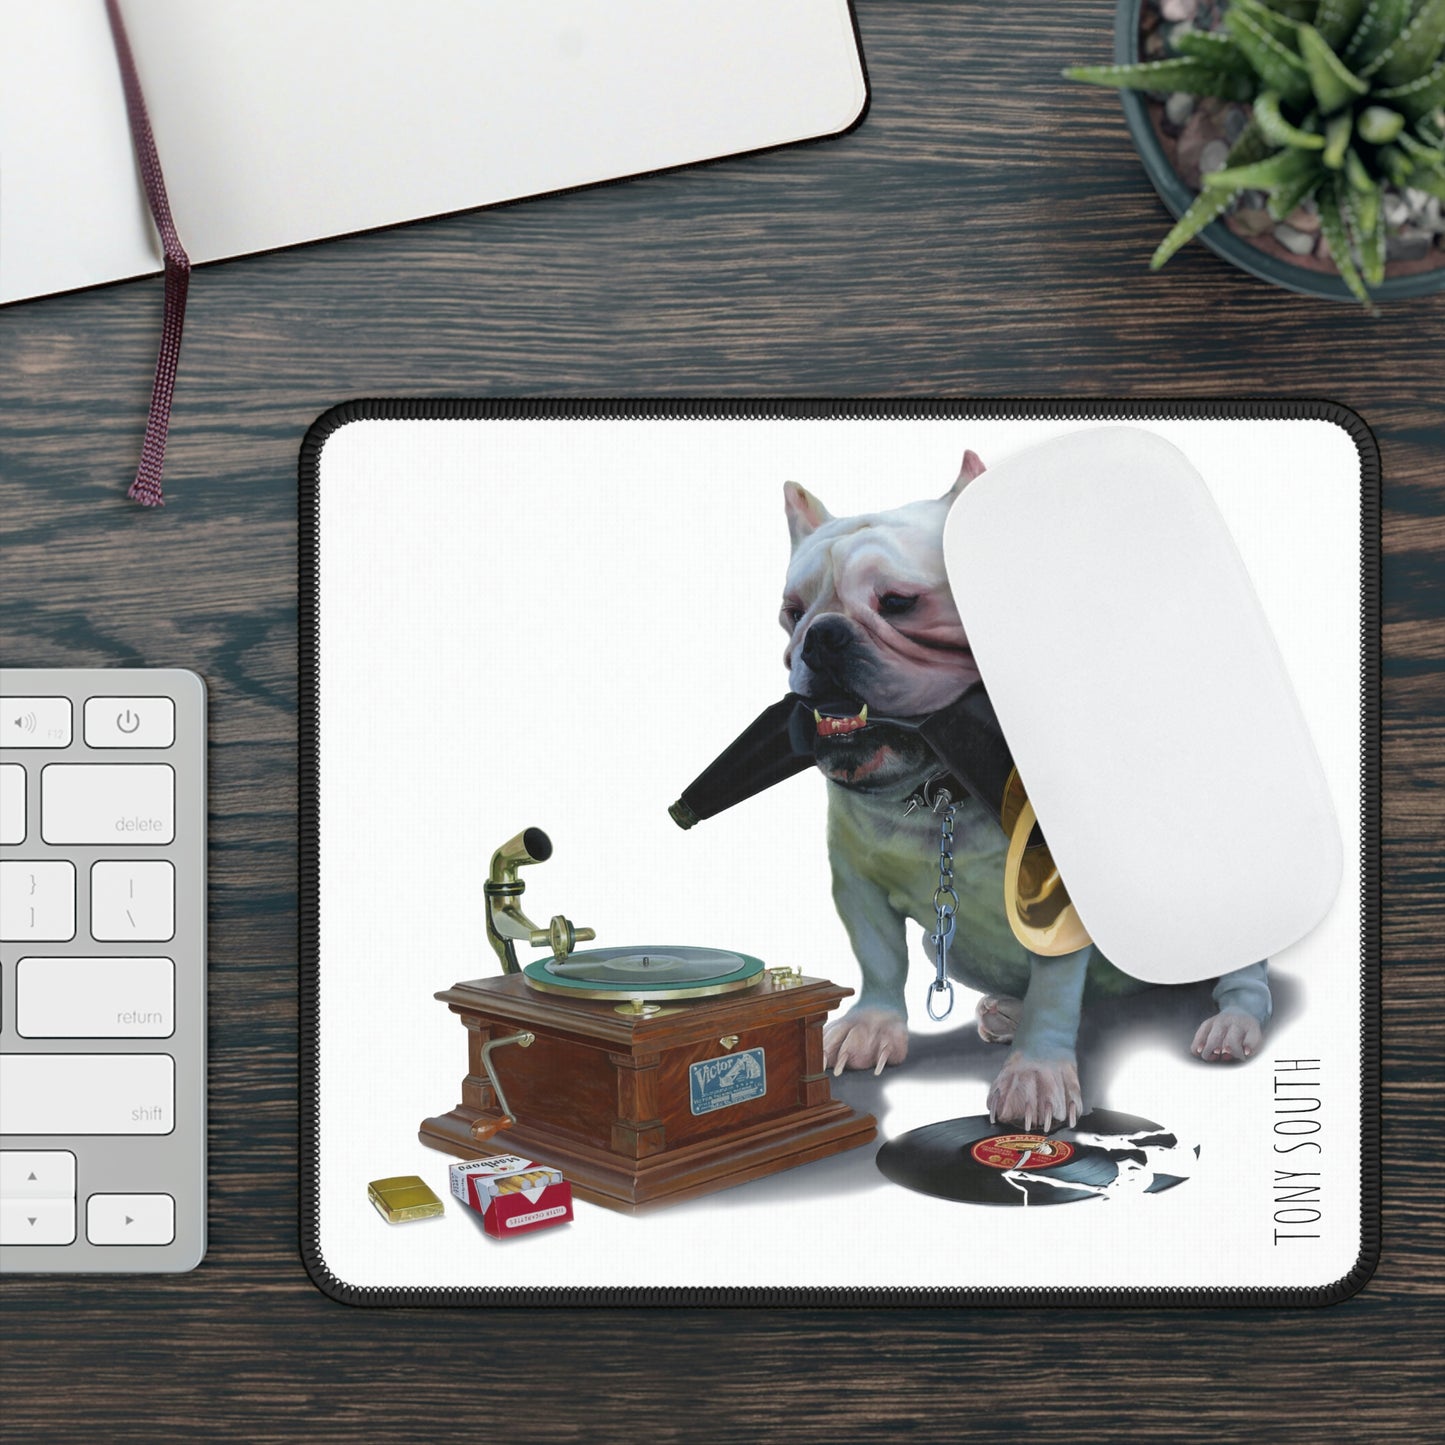 Tony South: "His Masters Voice" - Gaming Mouse Pad